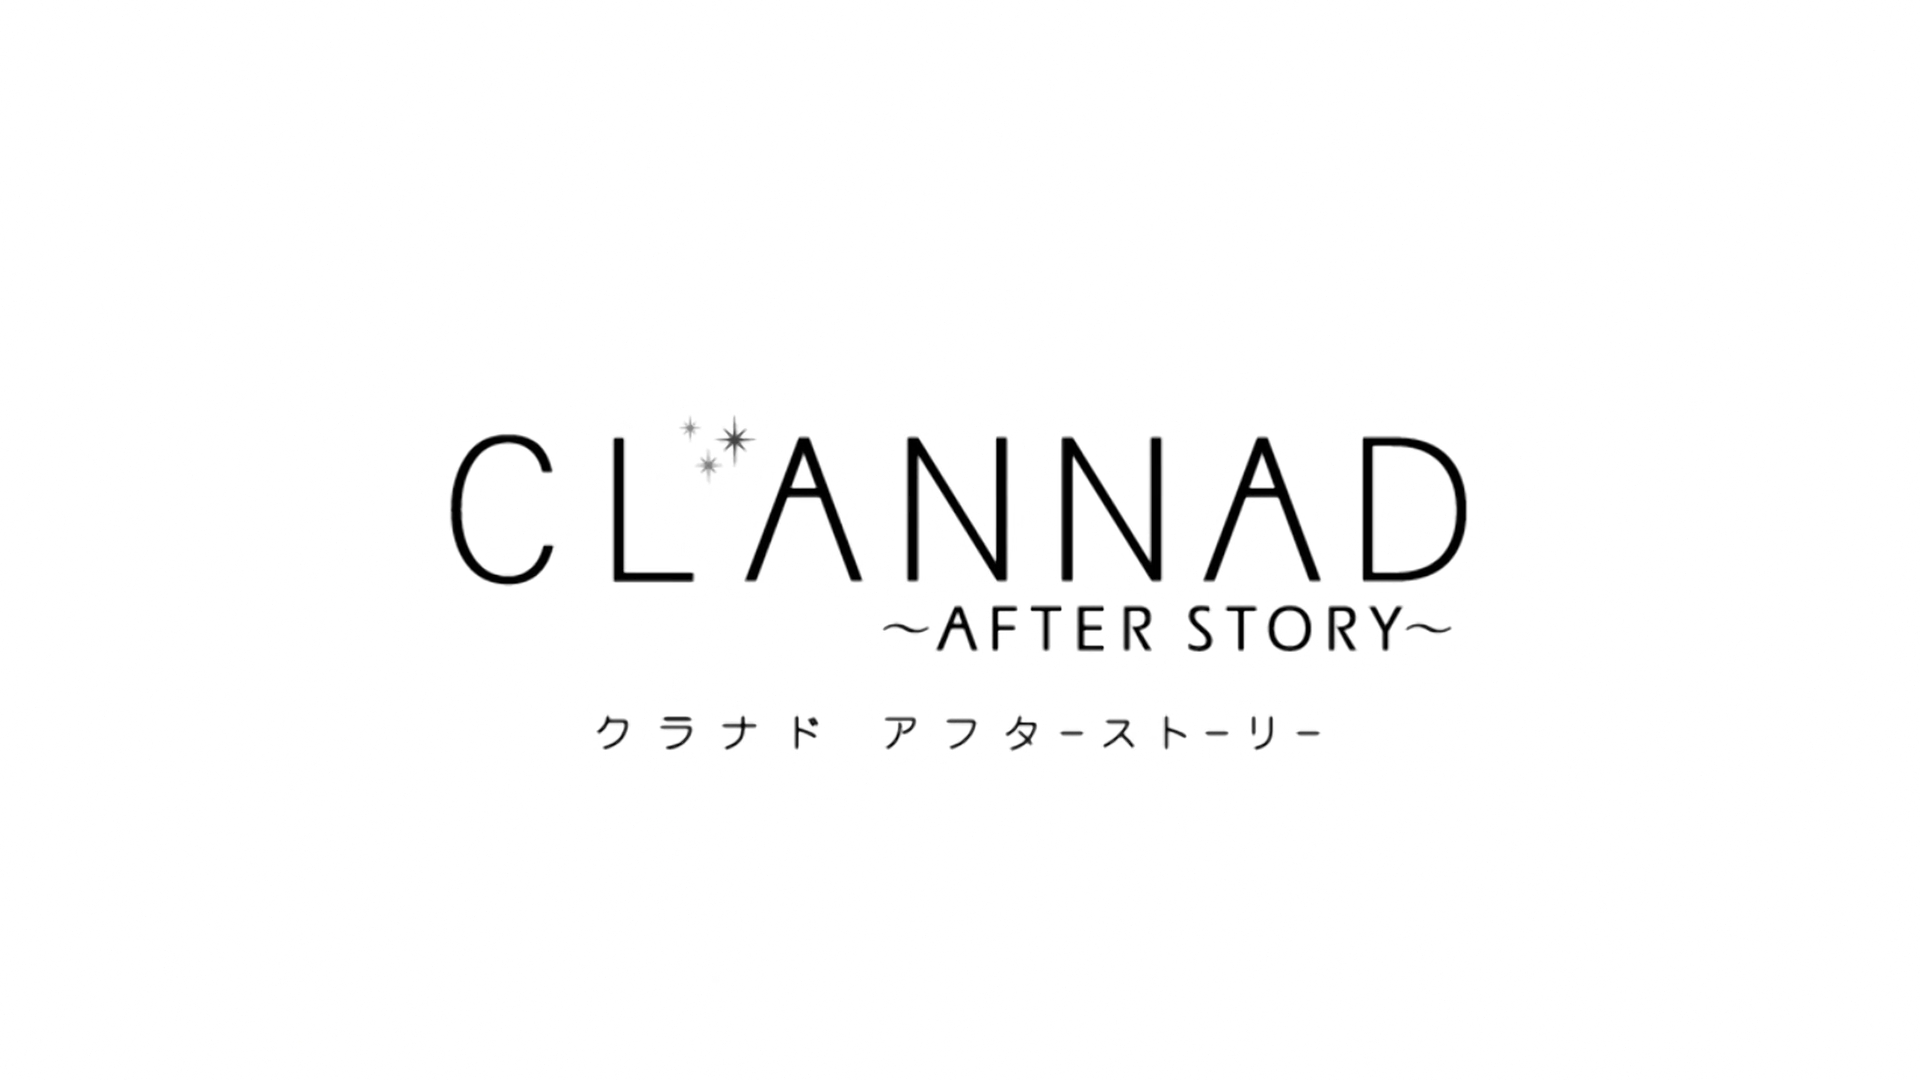 Clannad ~After Story~ (Blu-Ray) Announcement